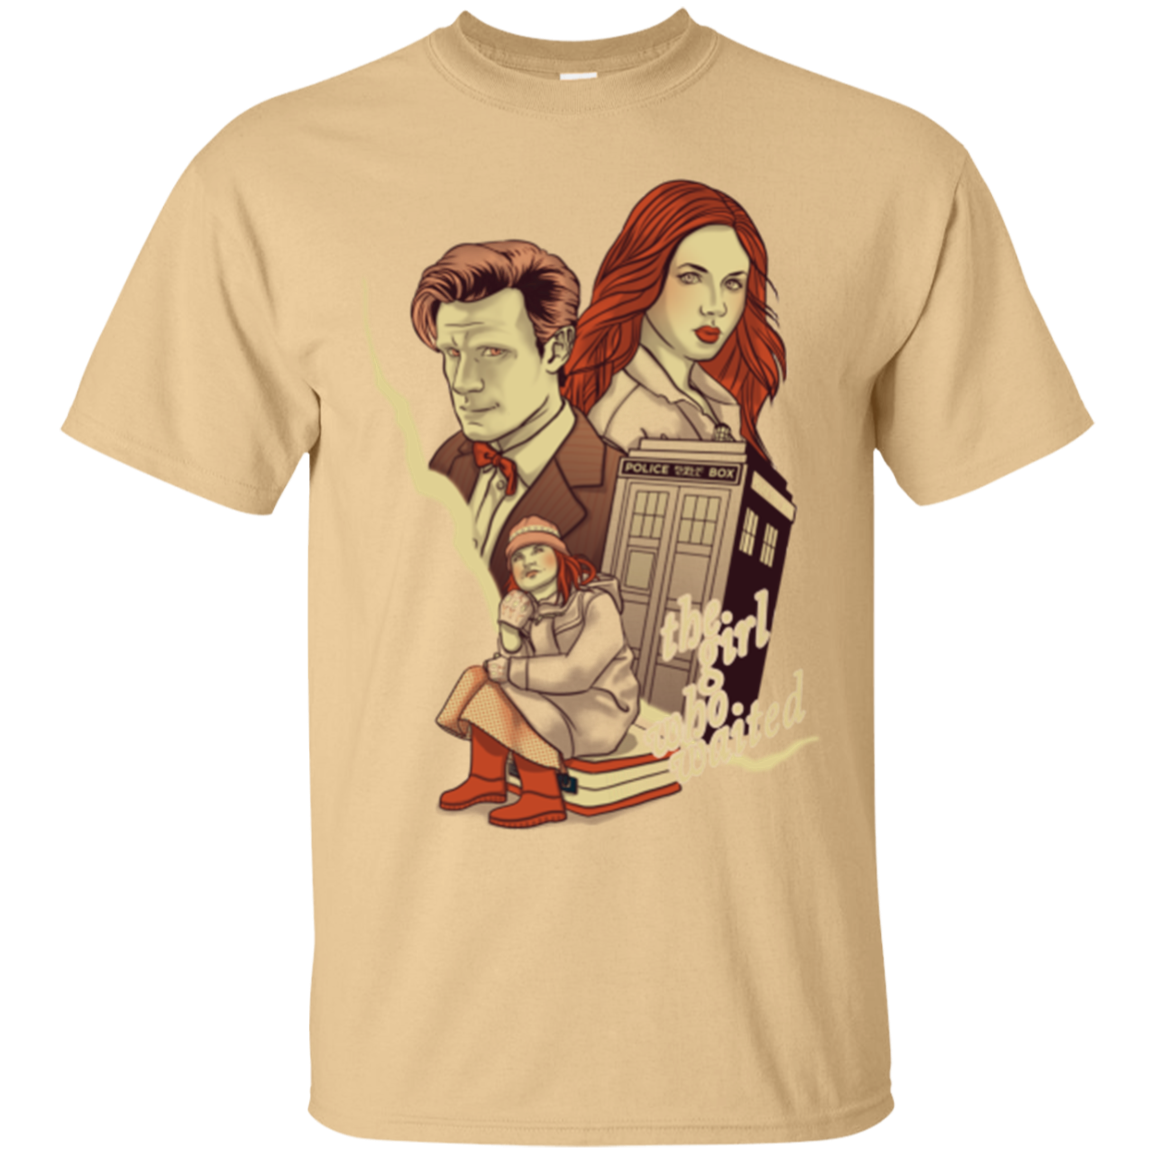 The Girl who waited T-Shirt